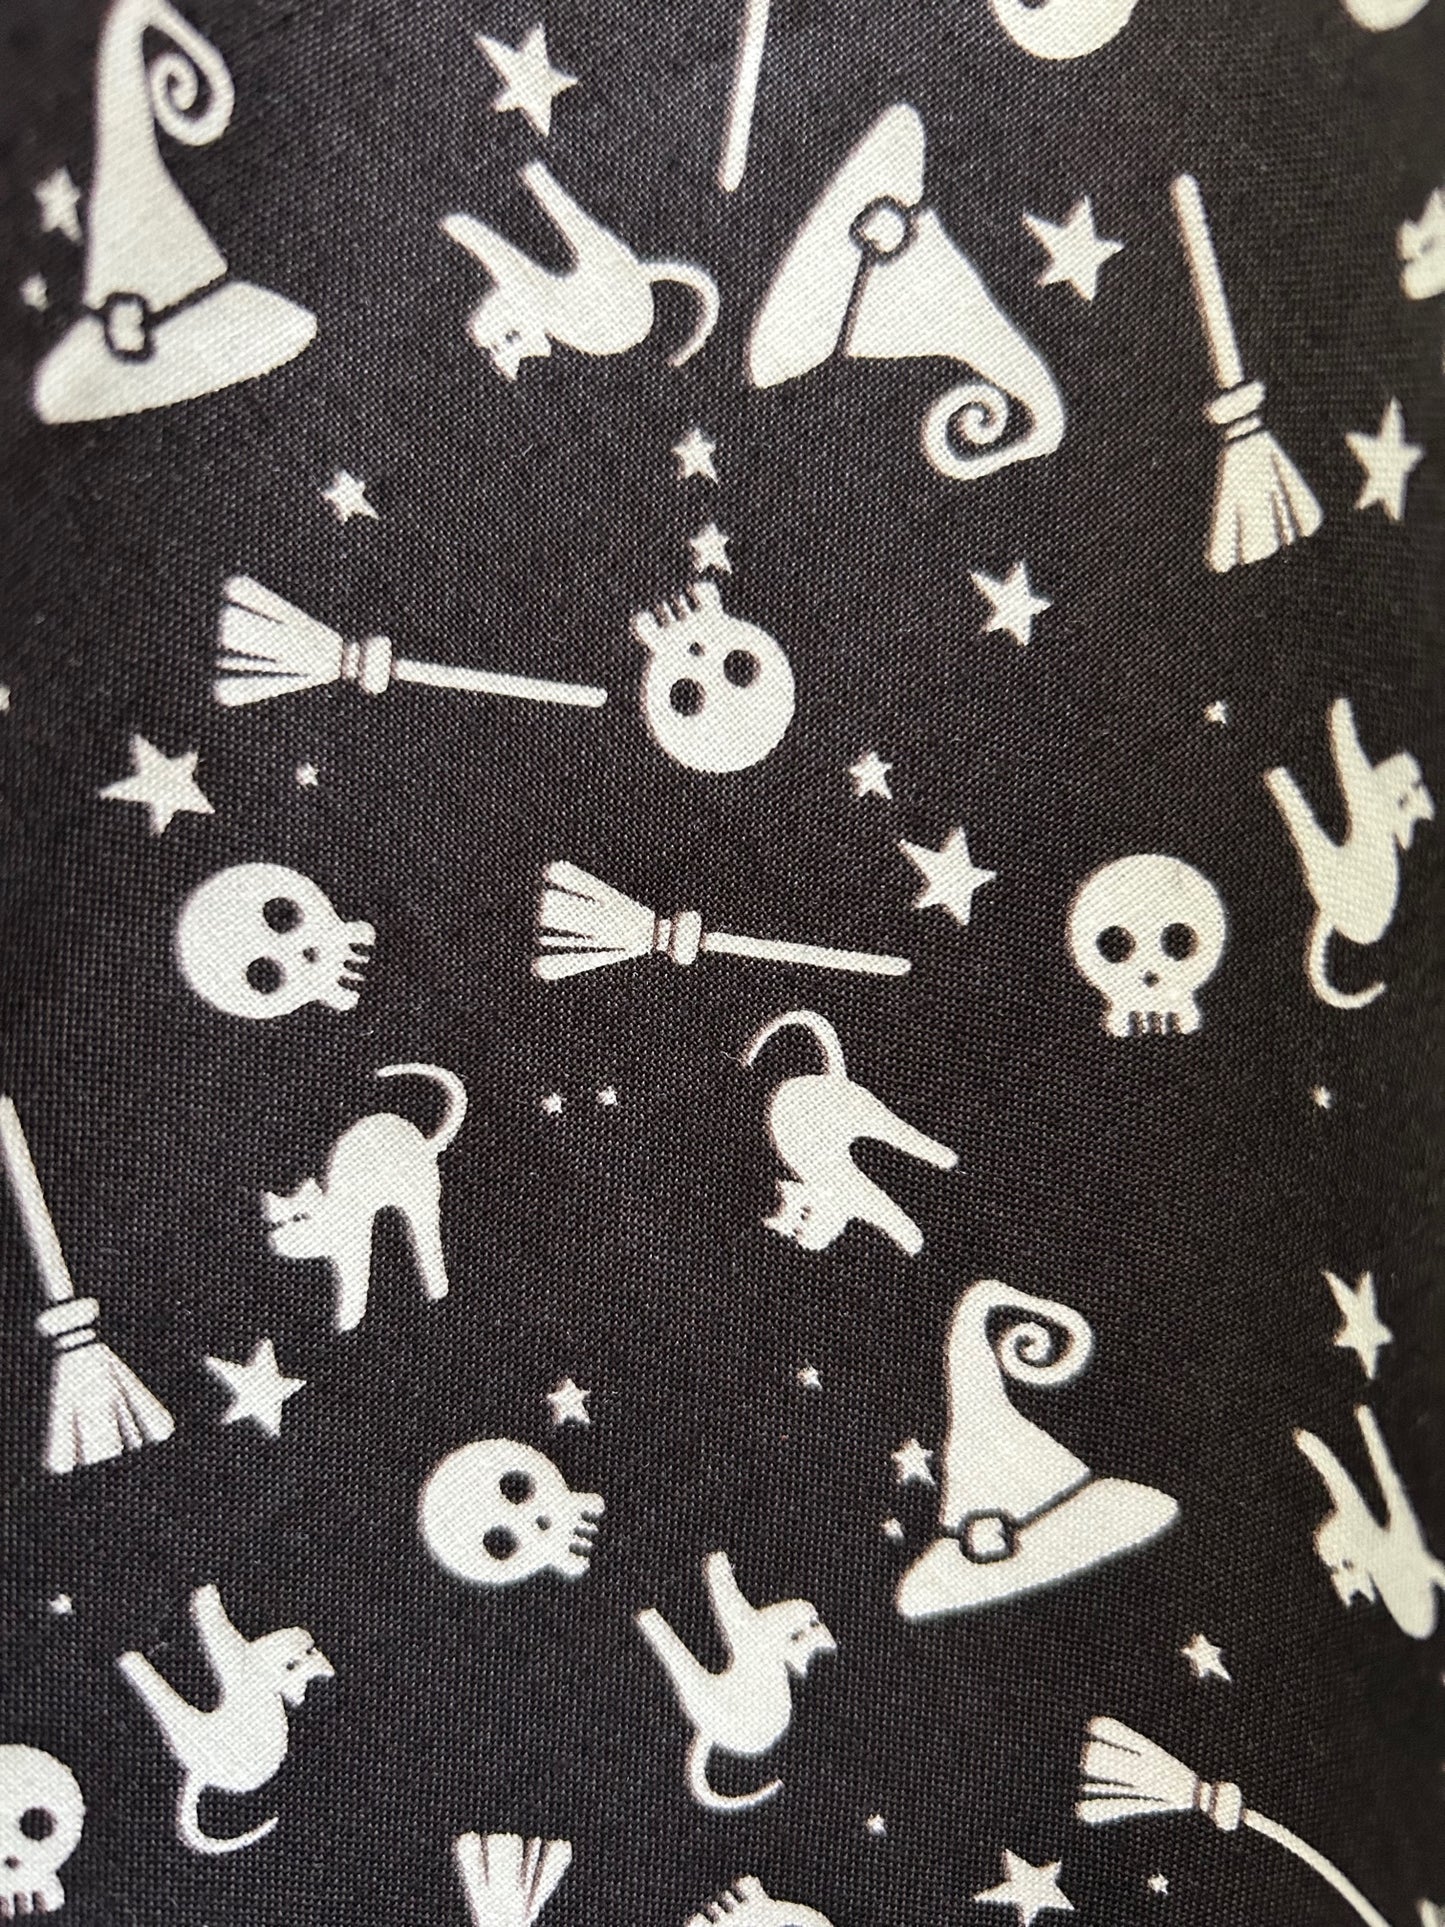 a close up of the fabric swatch showing a white tossed print of skulls, witch hats, broomsticks, stars and cats on black background 